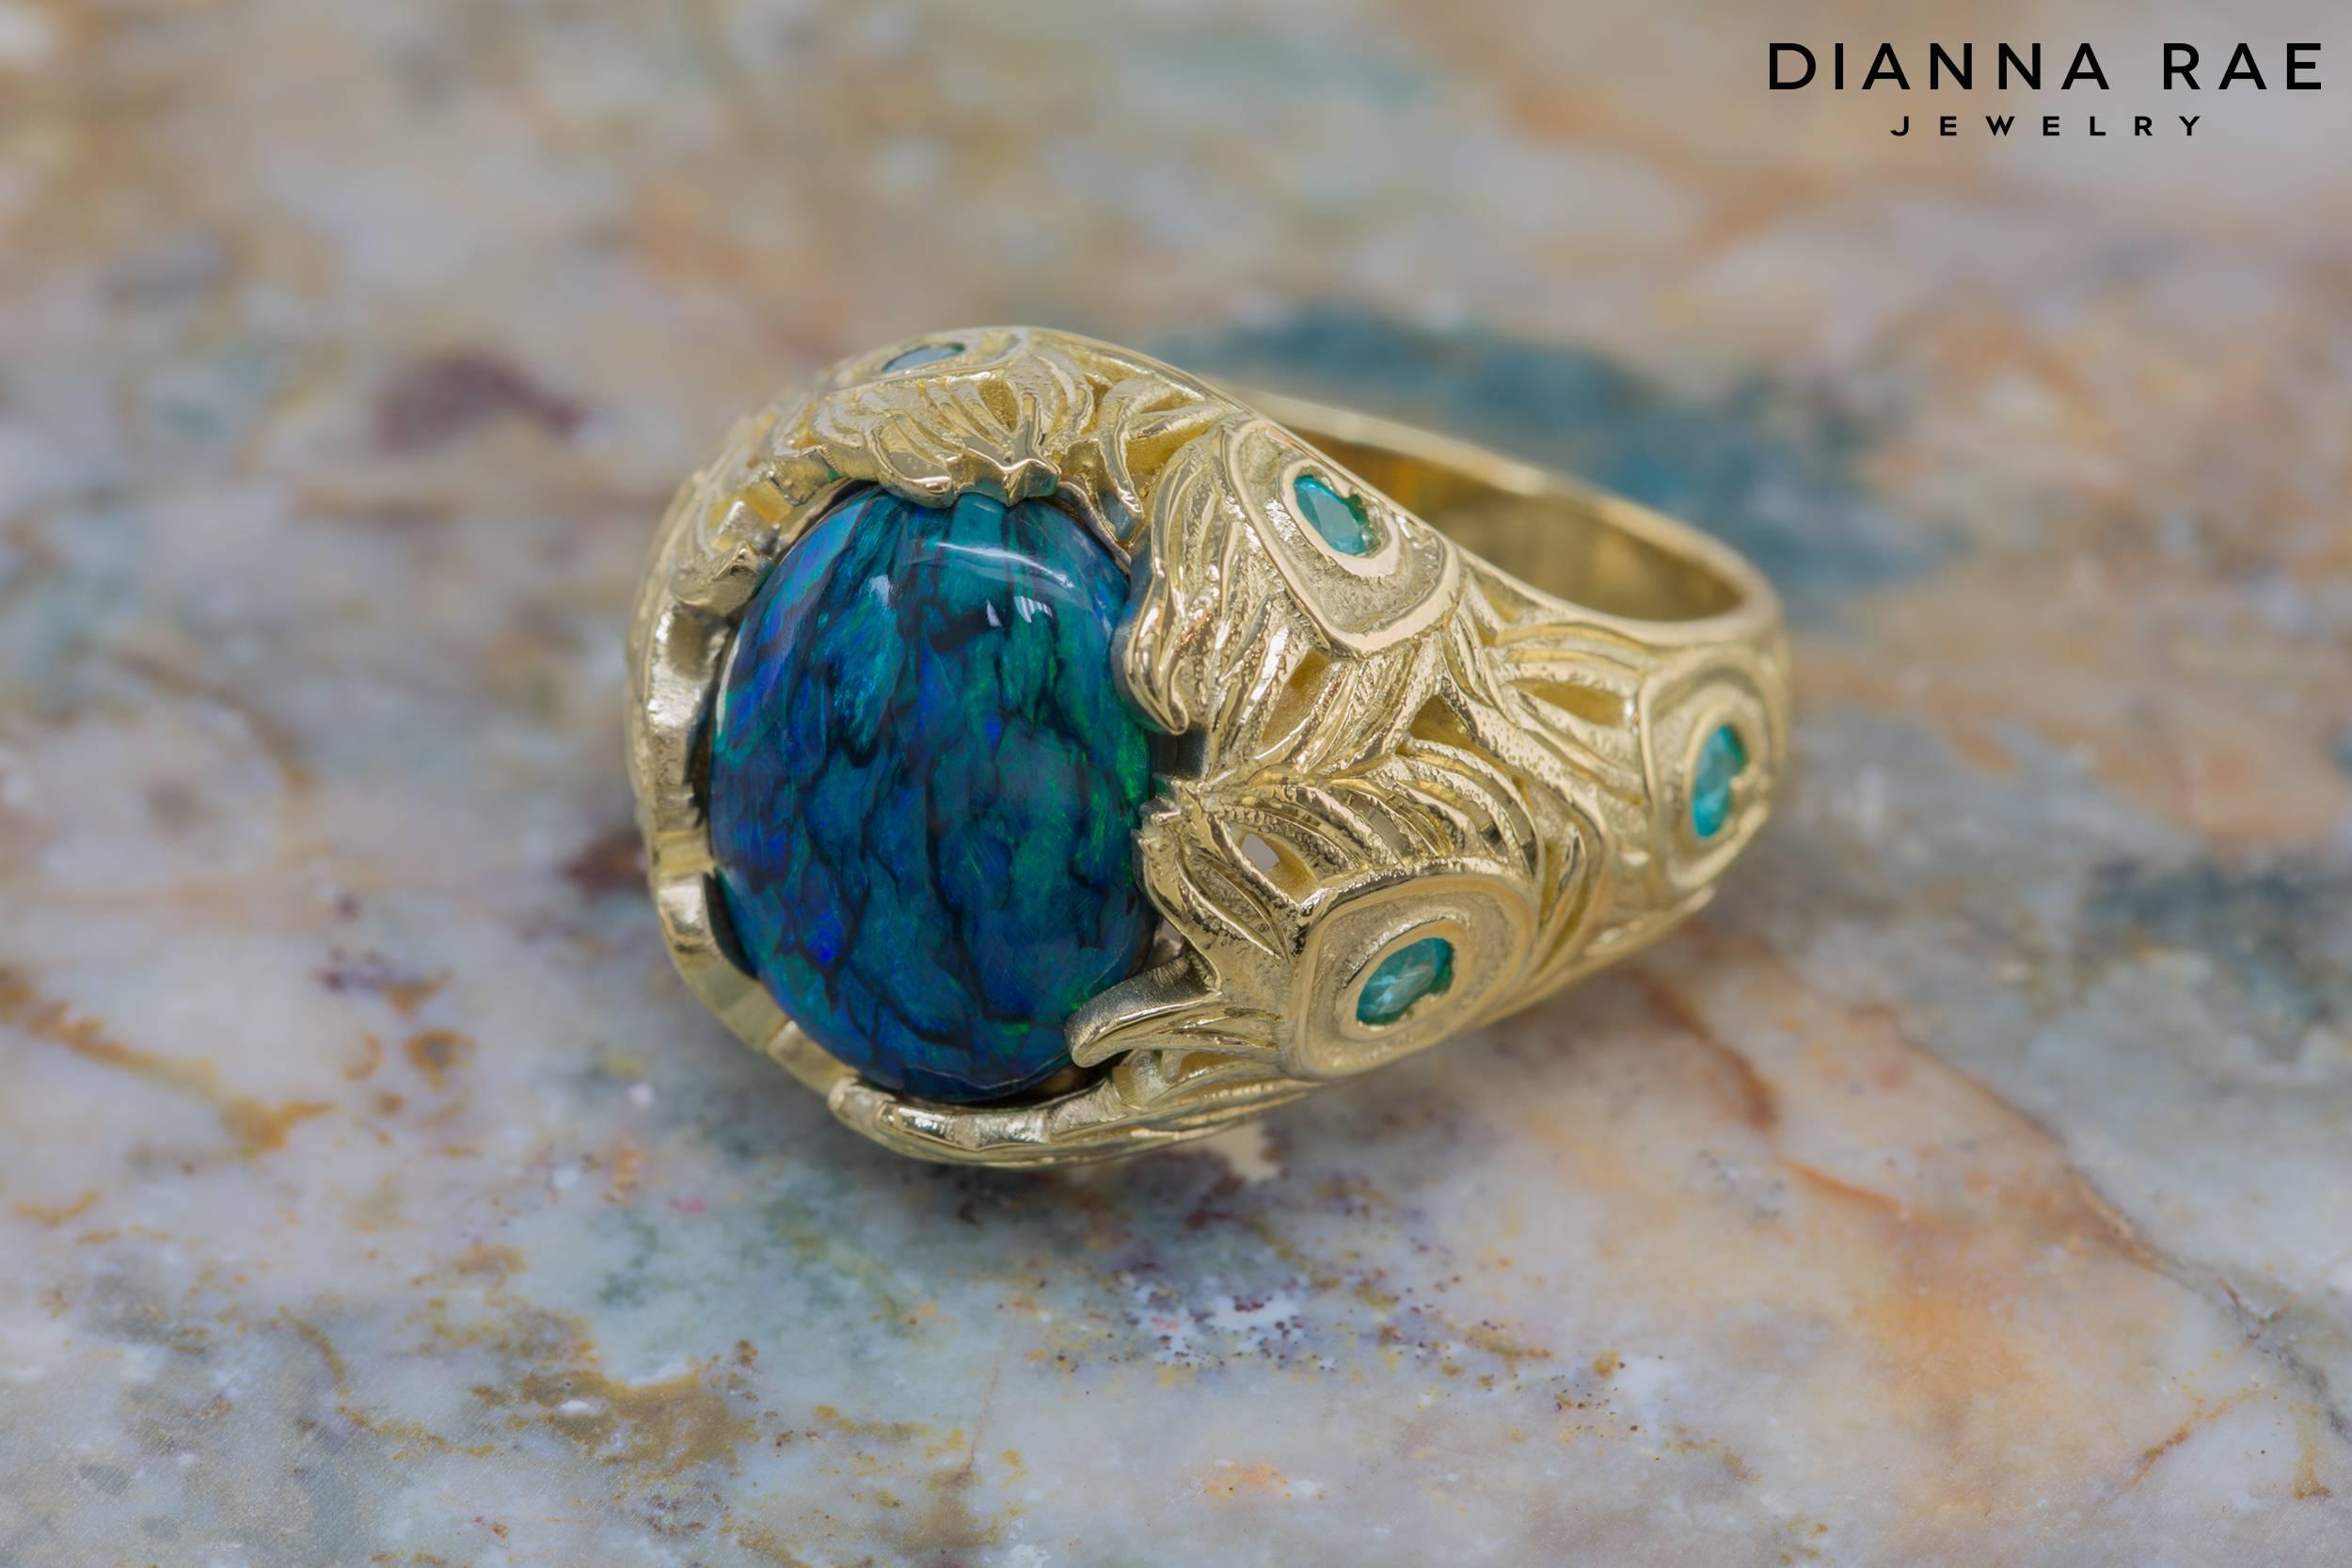 3.82 Carat Black Opal with Paraiba Tourmaline Peacock Ring in 18K Yellow Gold

Truly inspired by nature, this captivating rare 3.82 carat black opal has a natural play of colors that resemble beautiful blue and green peacock feathers. To perfectly